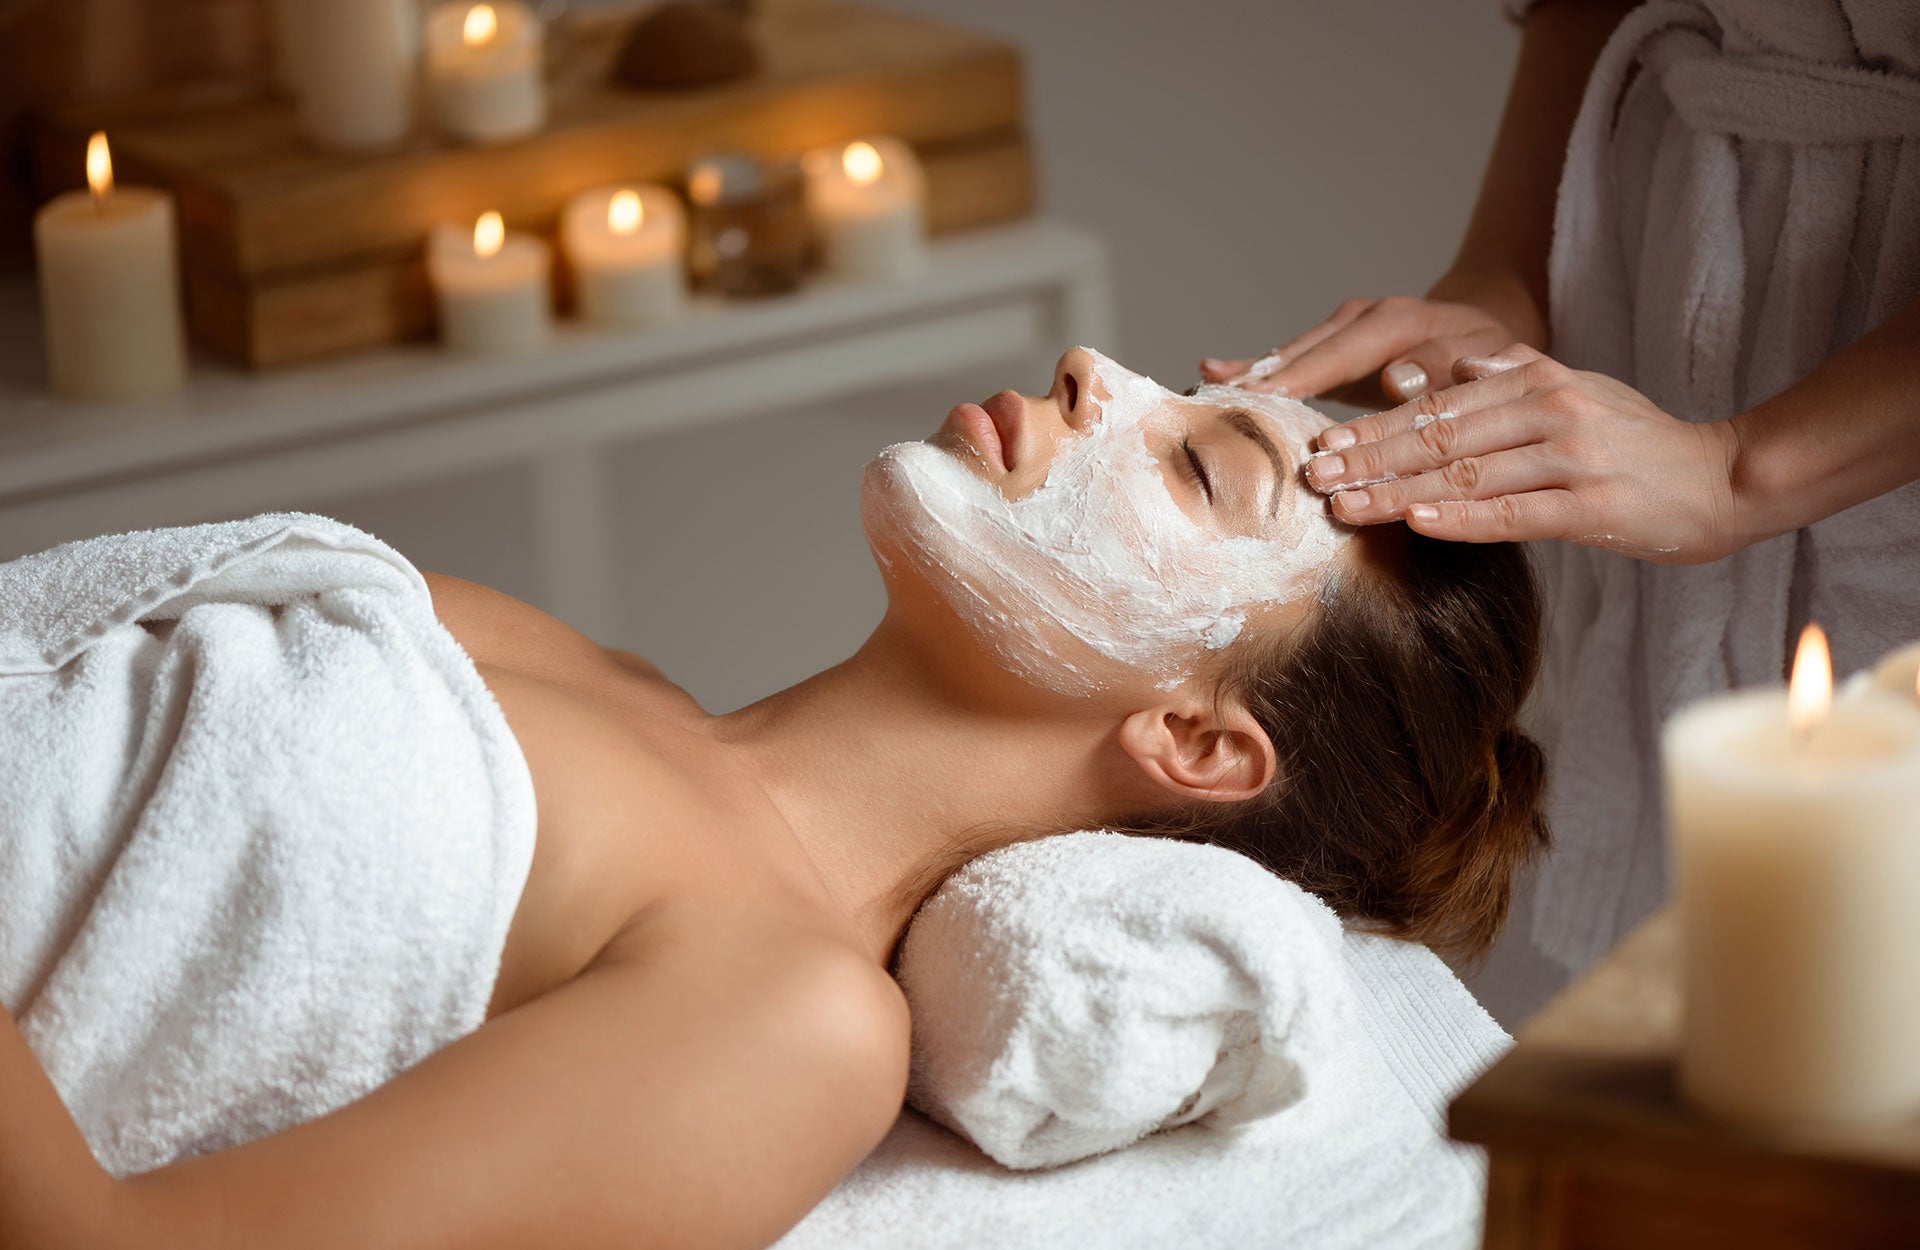 Why become a beauty/spa therapist? – Meraki Spa & Blends